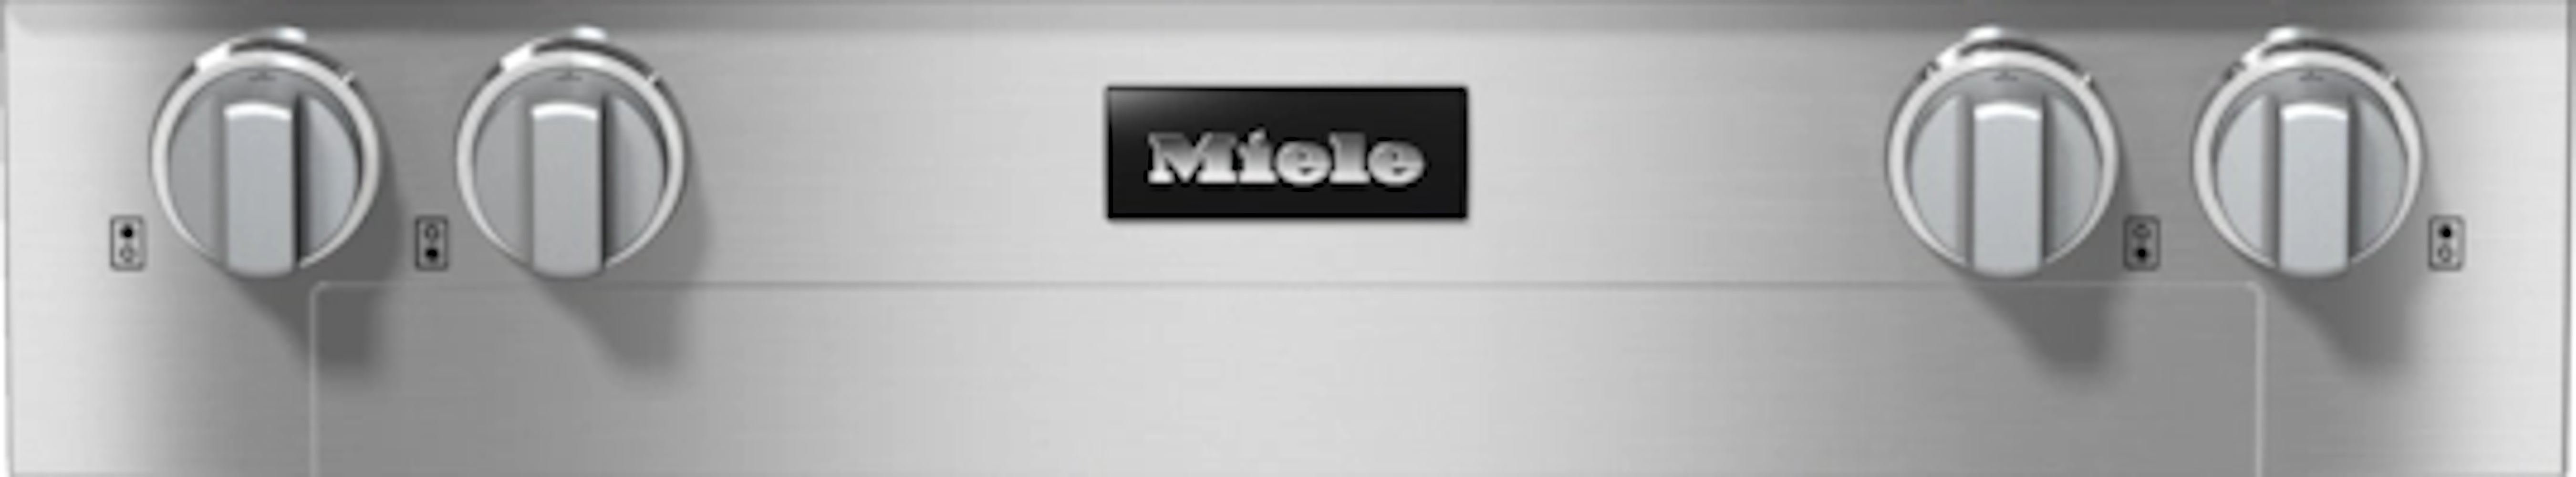 Miele - 30 Inch Gas Cooktop in Stainless - KMR 1124-3 G